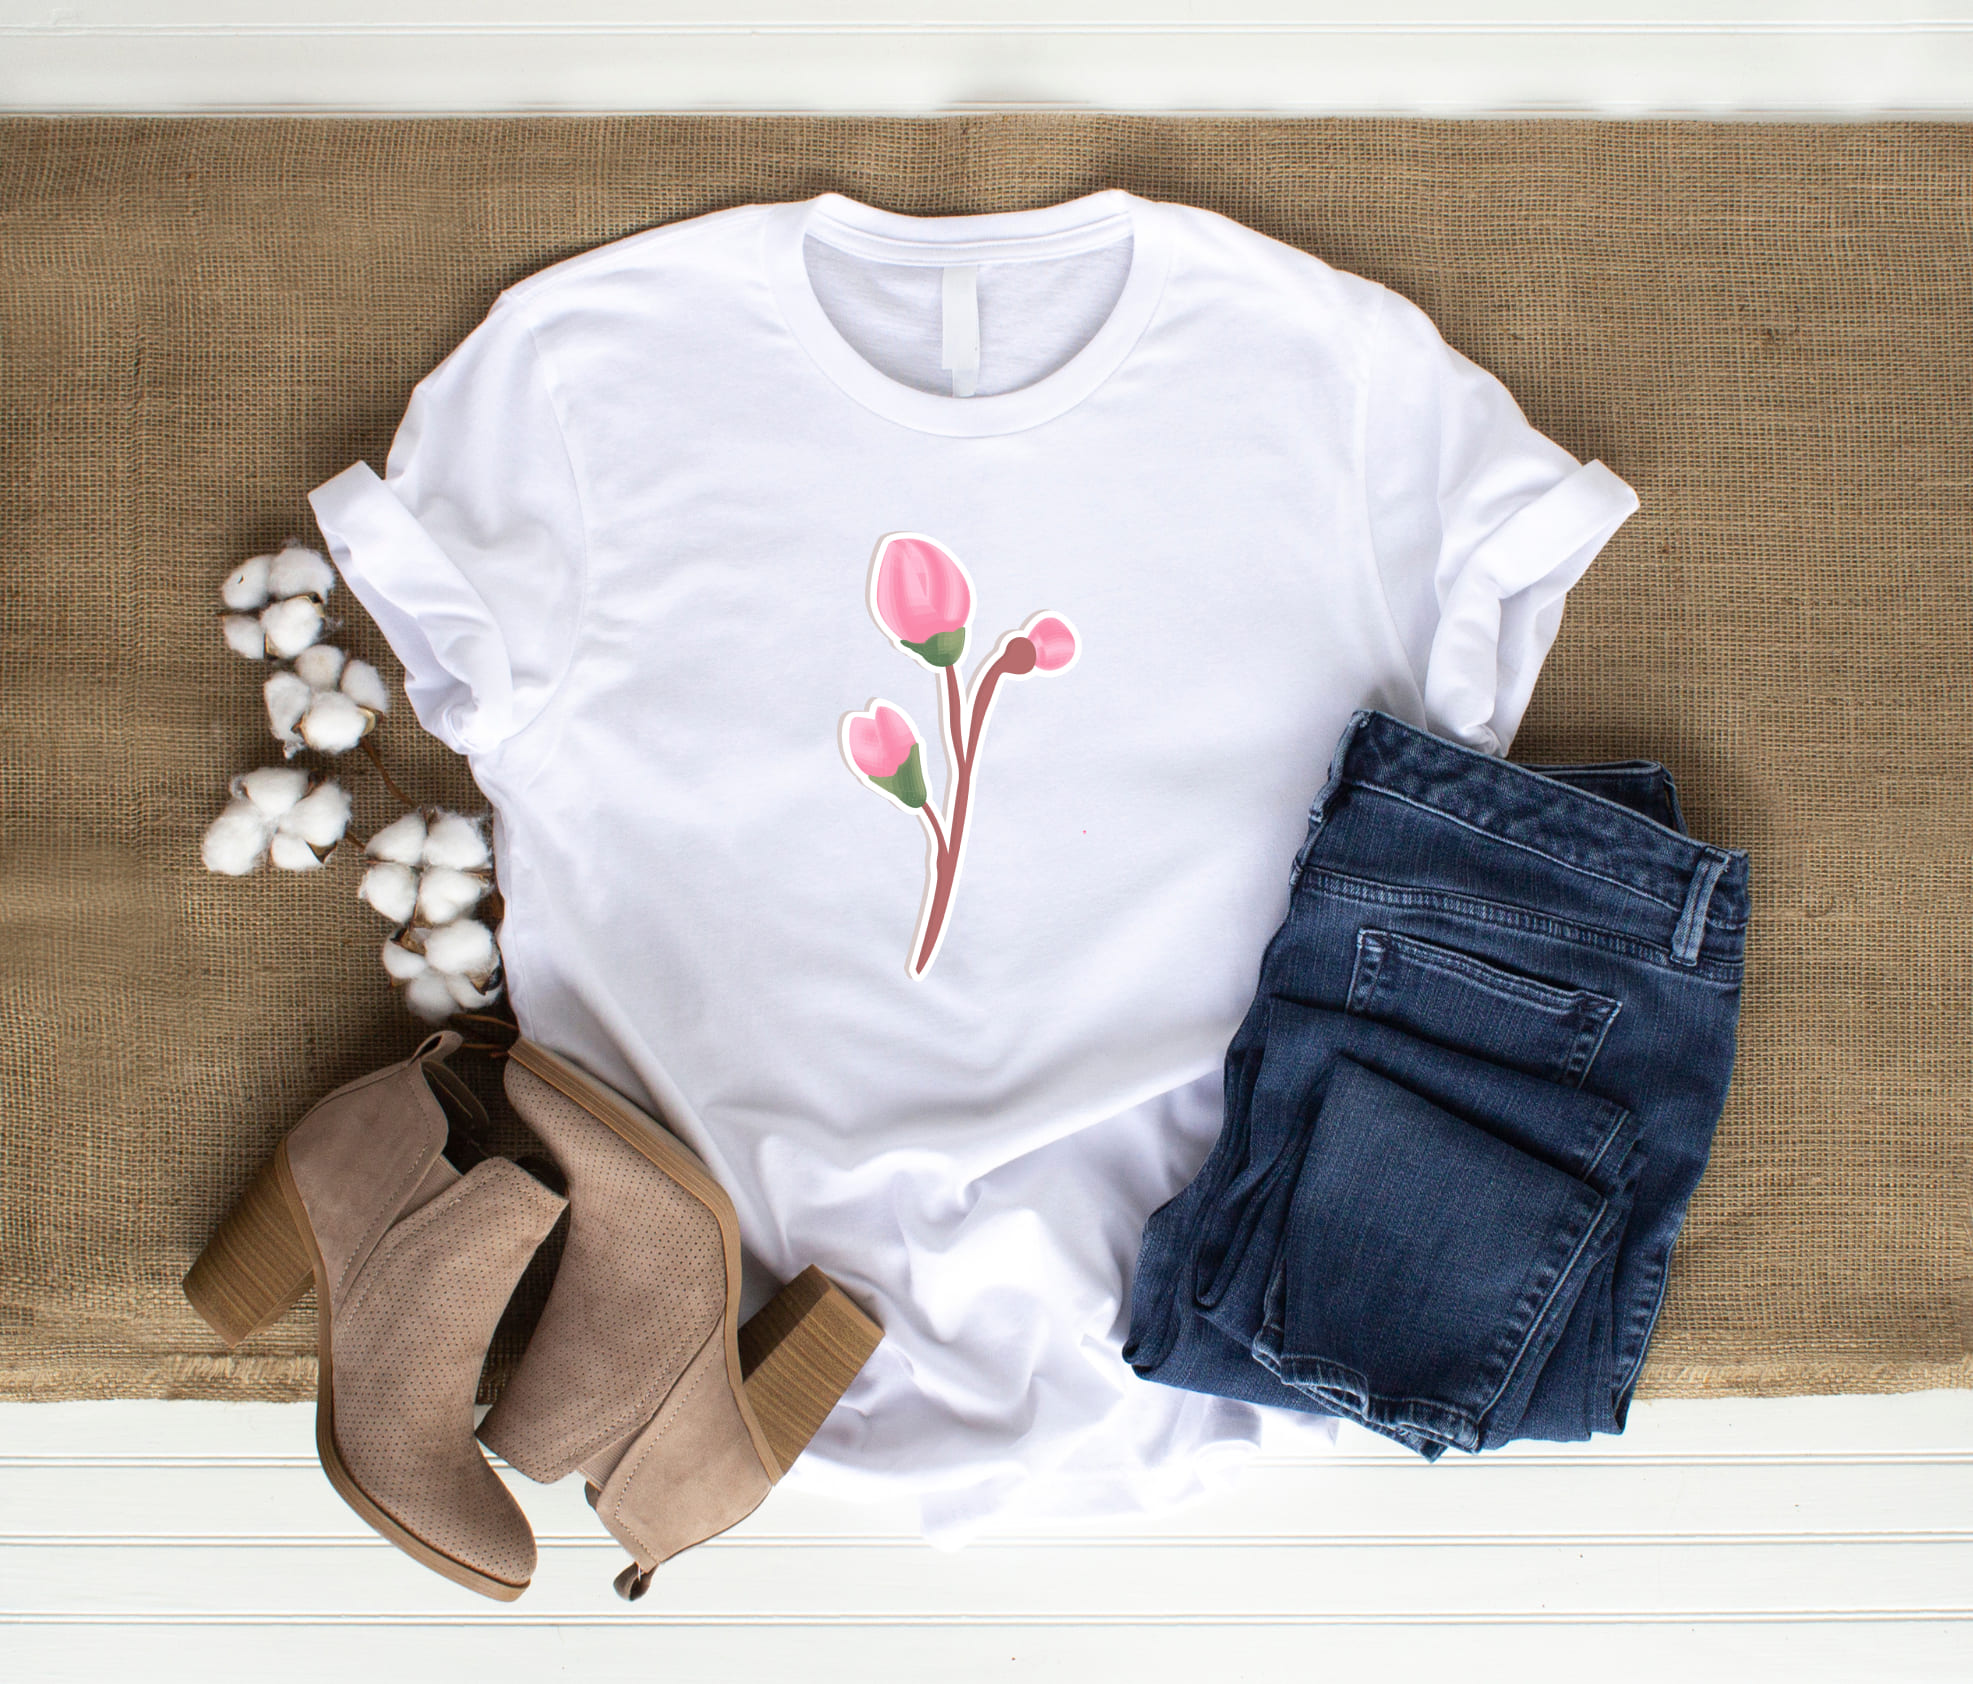 Flowers and other things on a T-shirt.